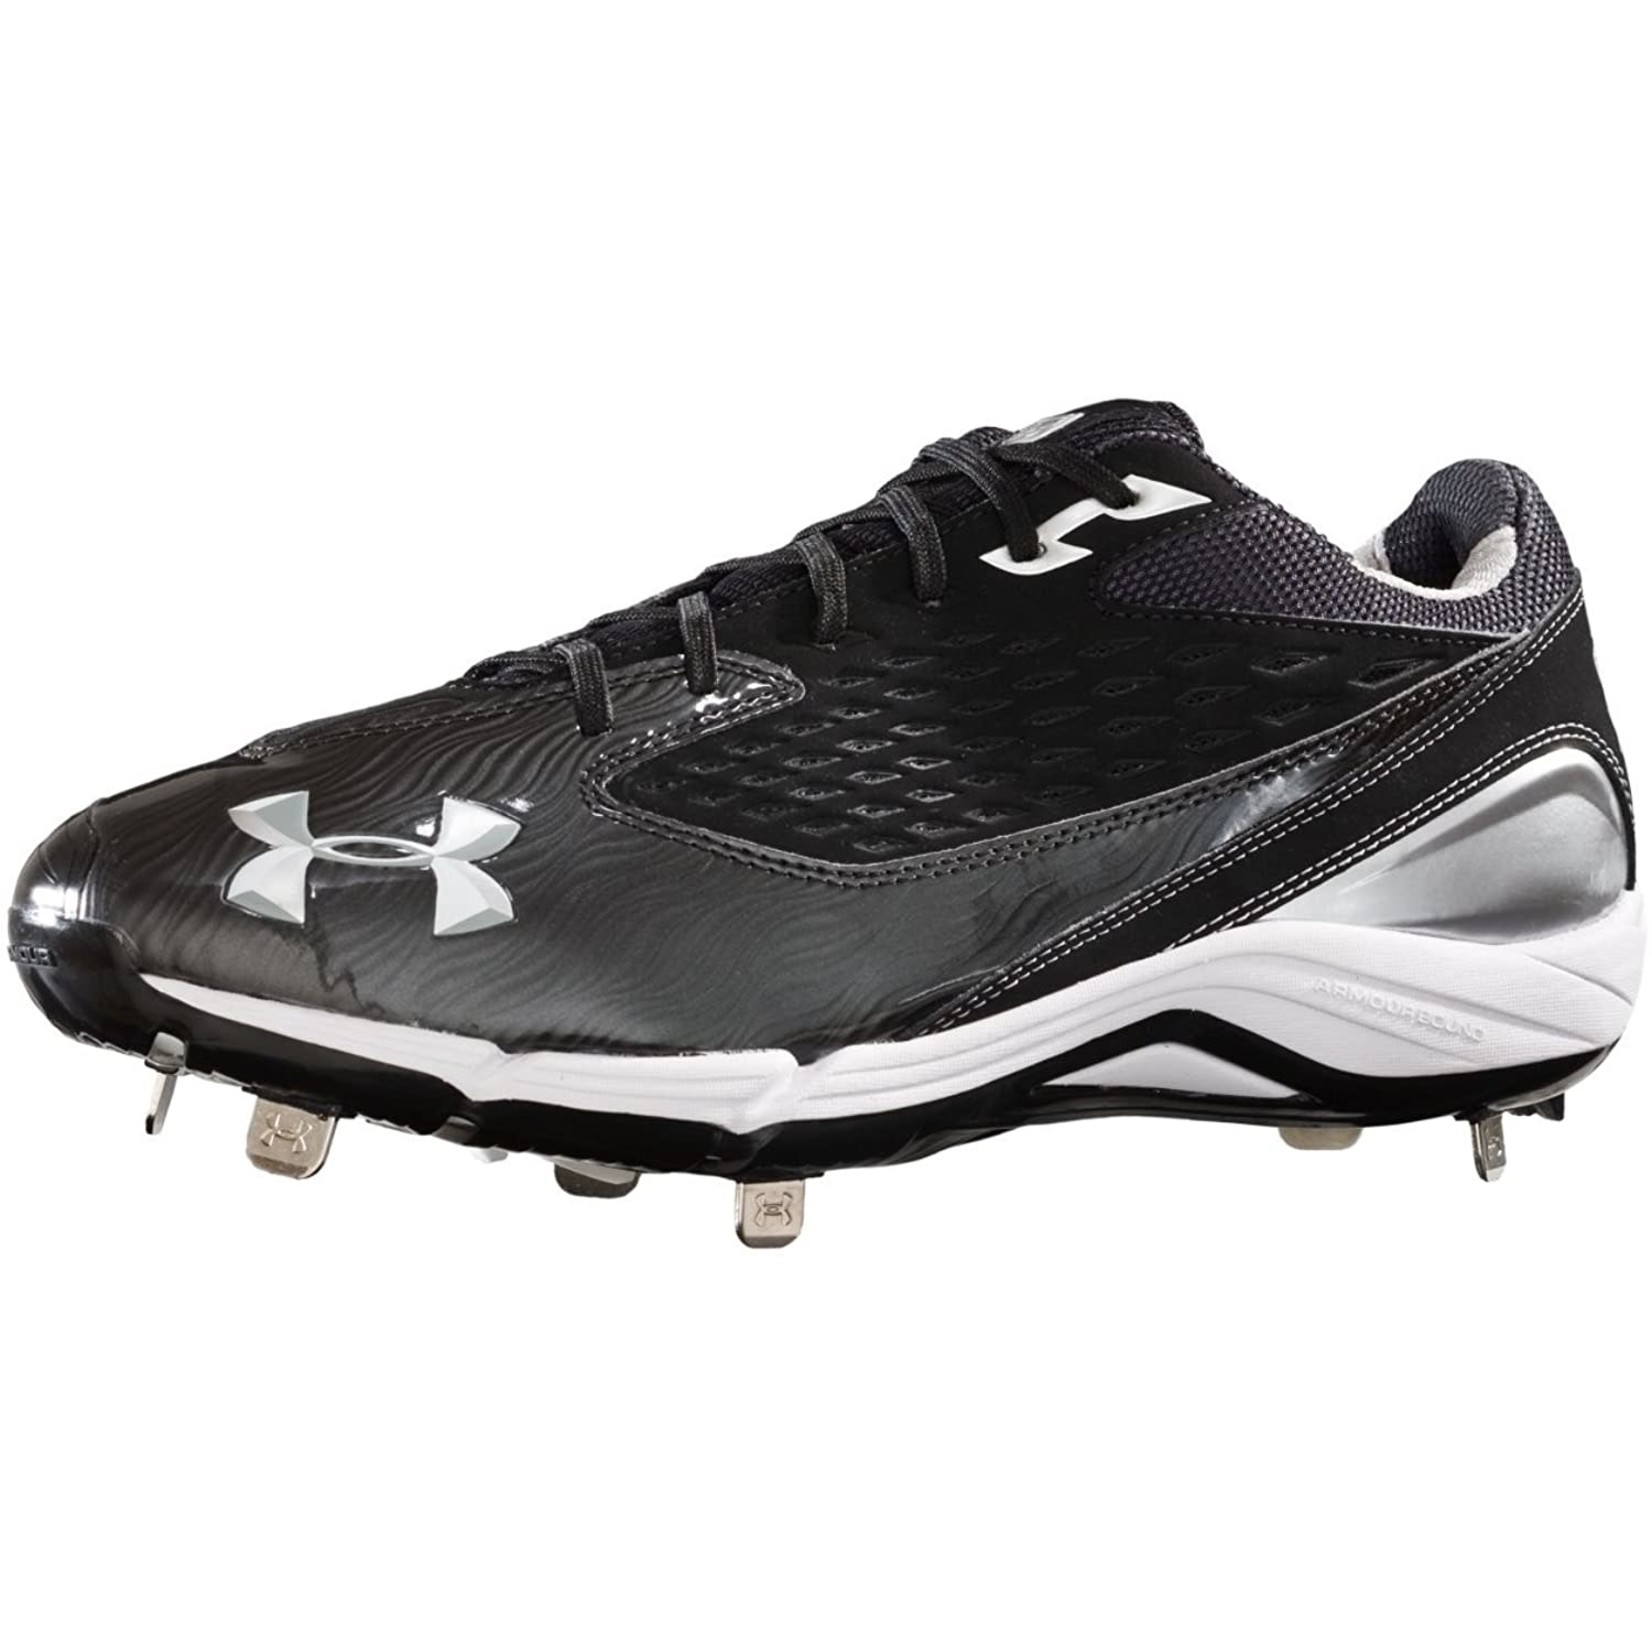 Under Armour NATURAL II LOW ST